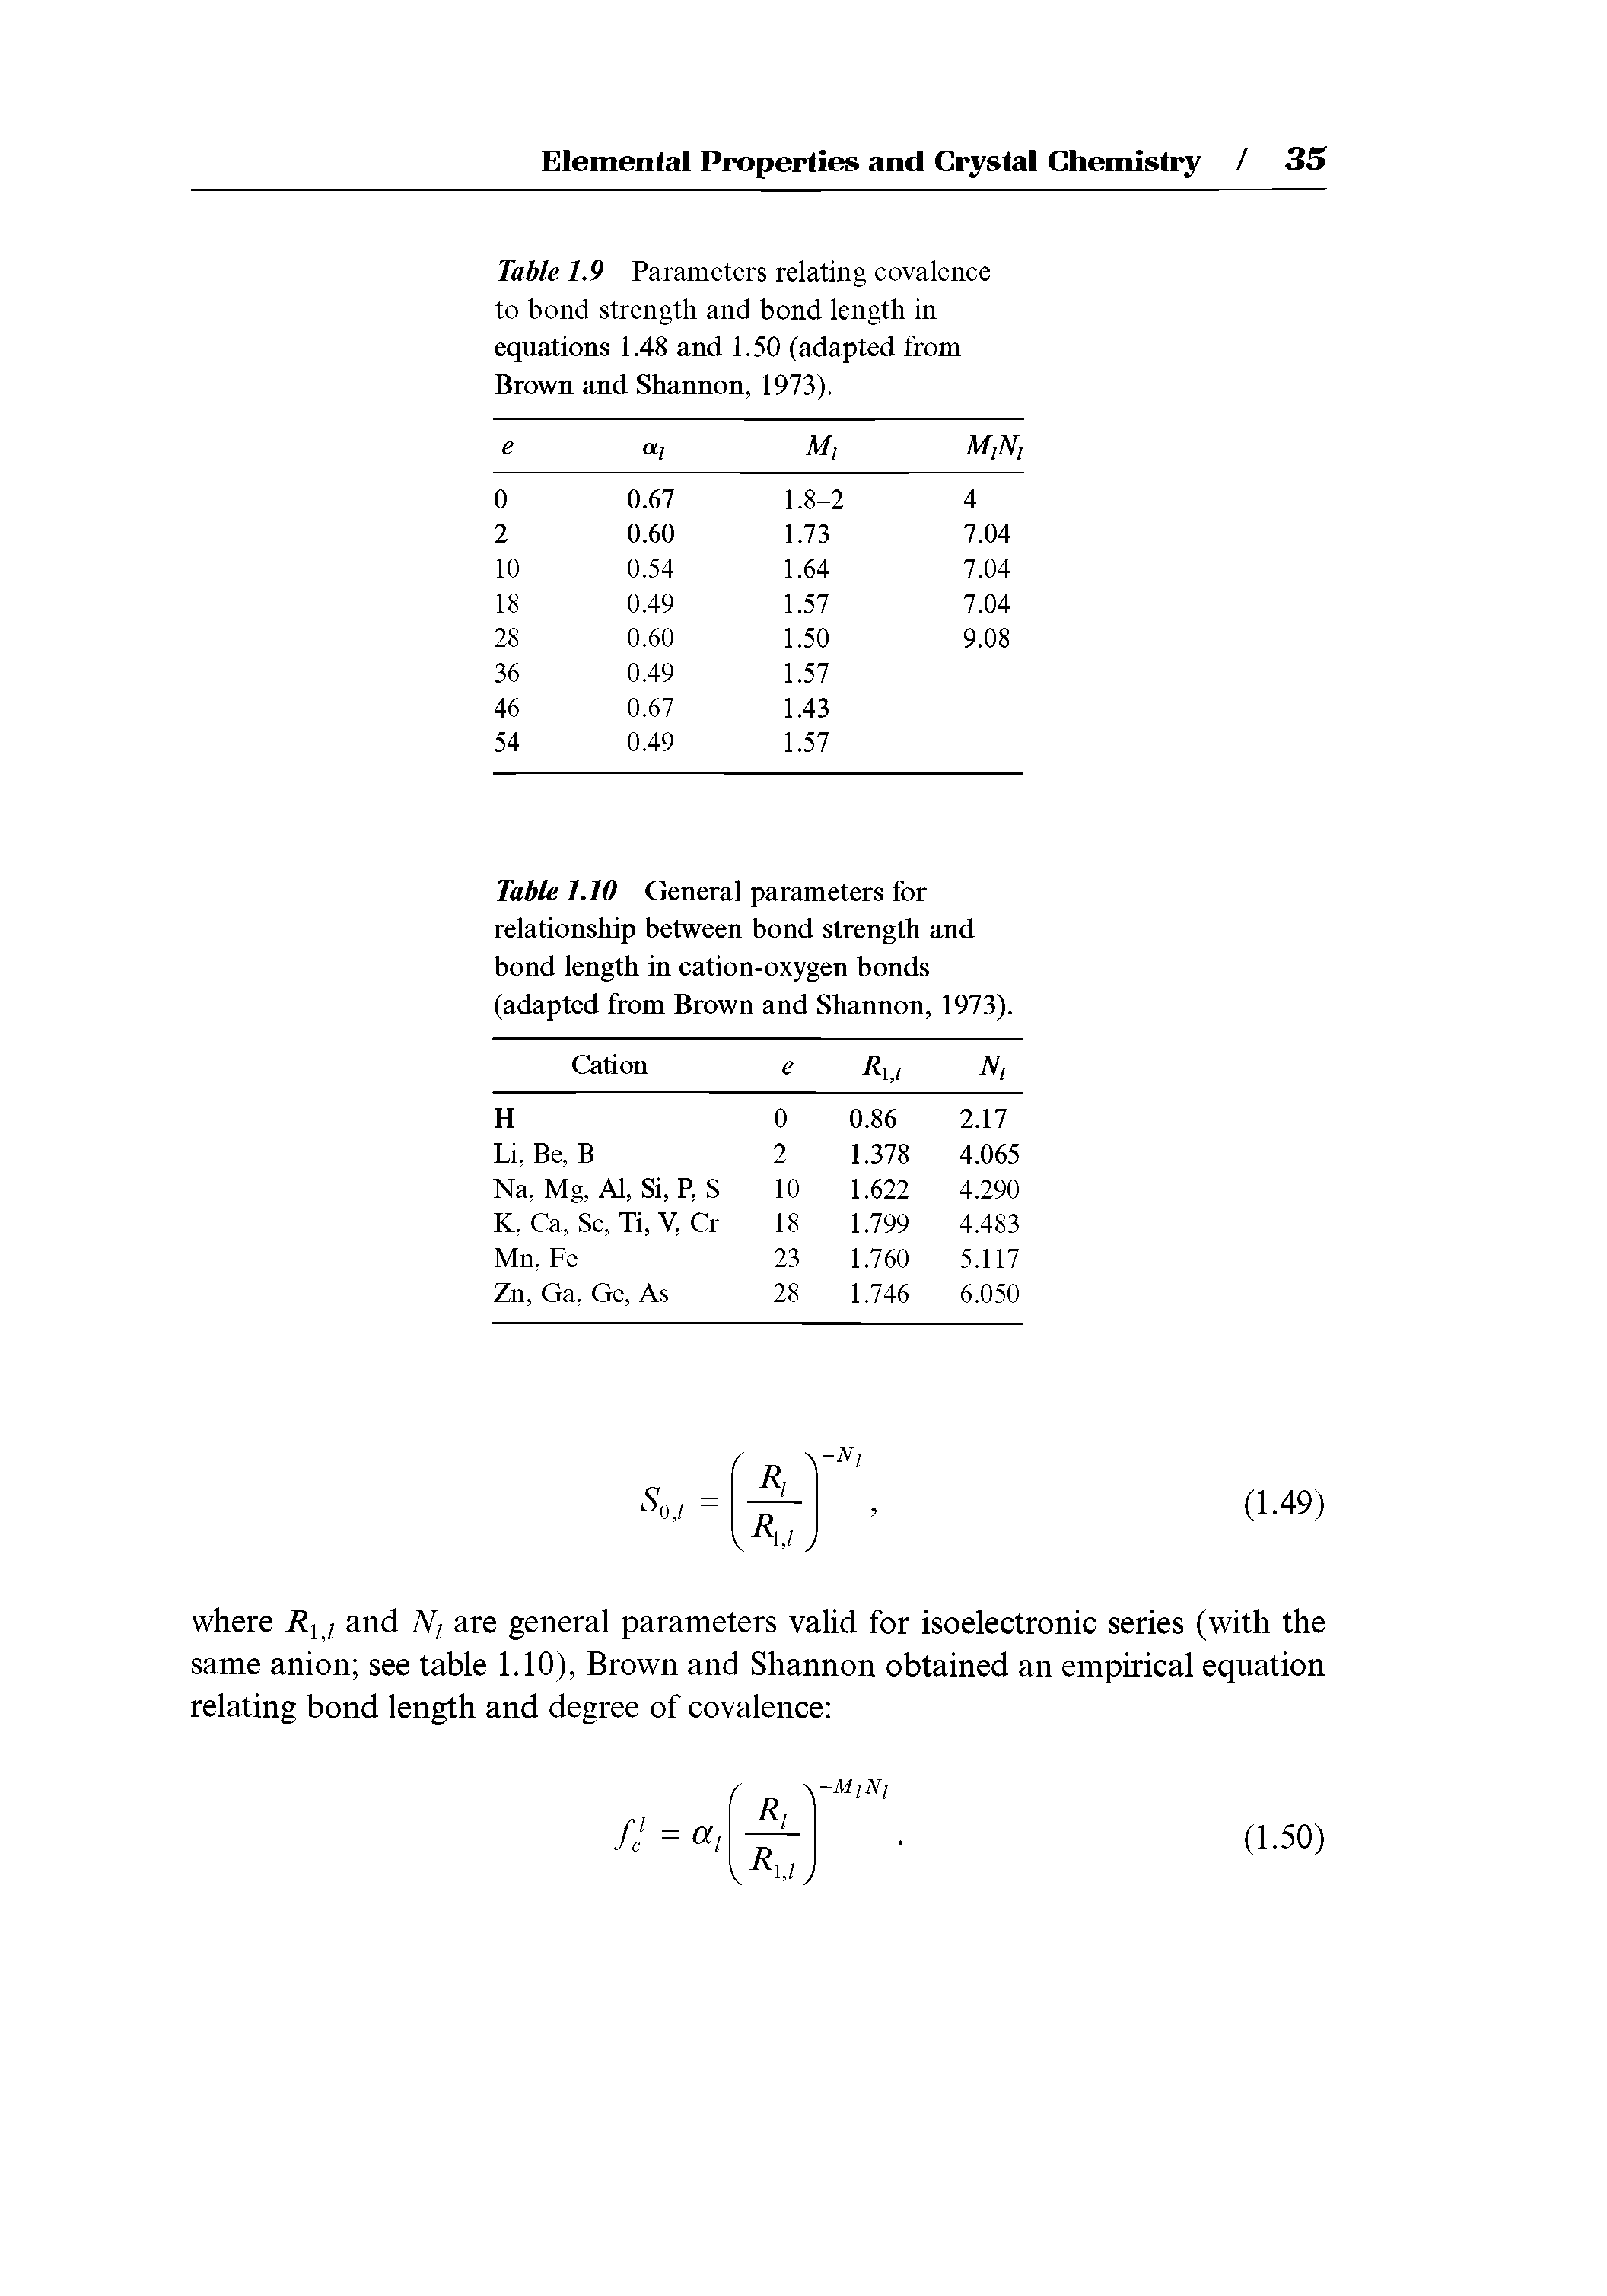 Table 1.10 General parameters for relationship between bond strength and bond length in cation-oxygen bonds (adapted from Brown and Shannon, 1973).